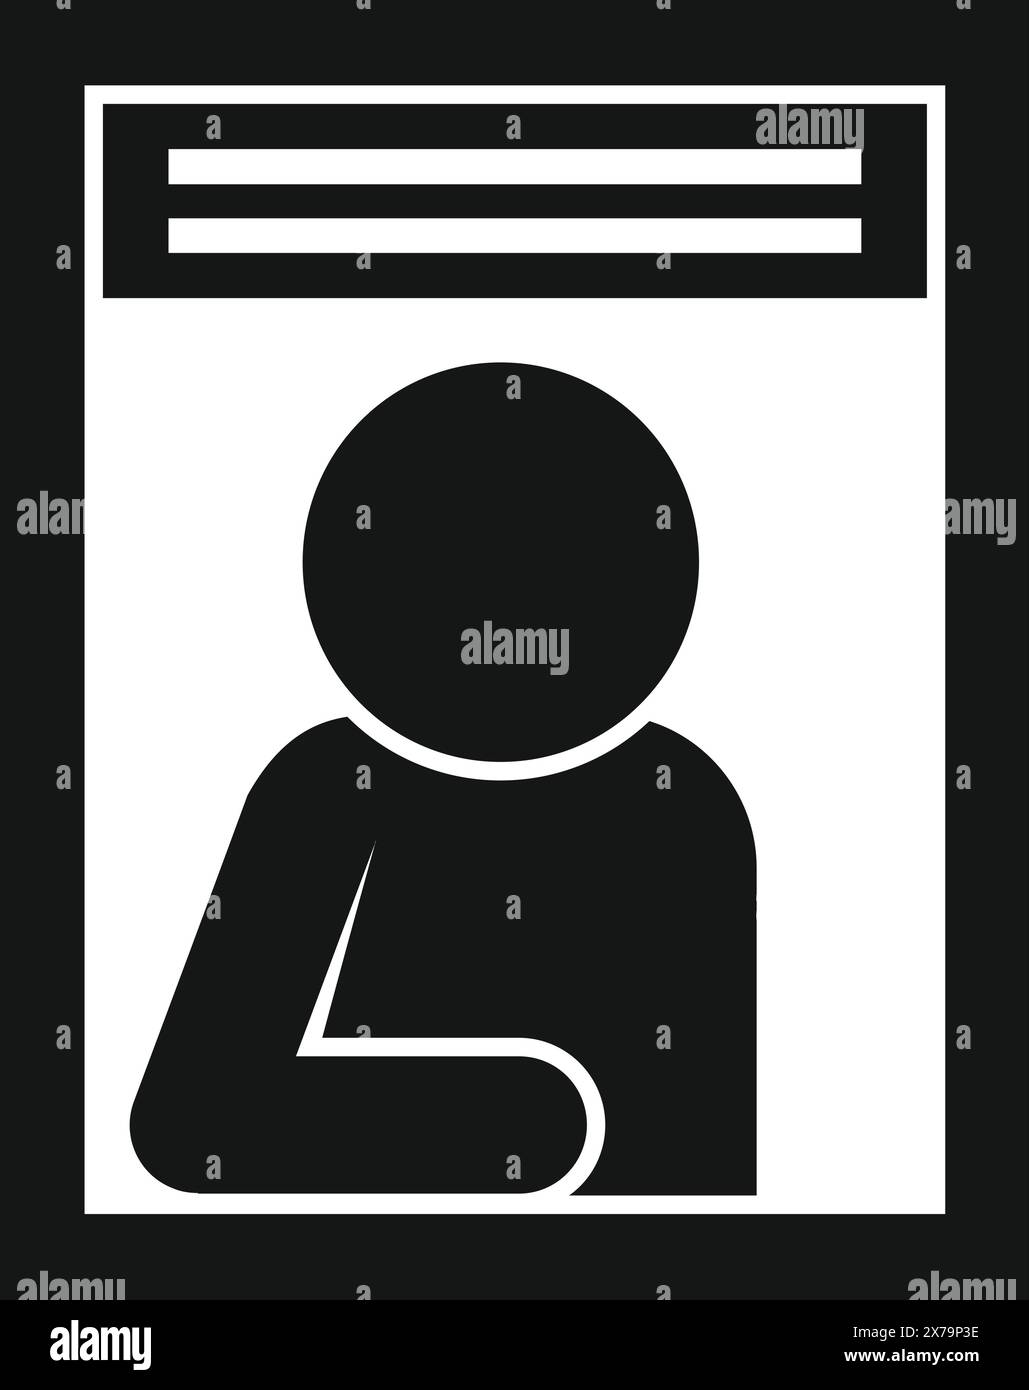 Minimalist black and white vector icon of a detained person representing incarceration and confinement in the correctional system Stock Vector